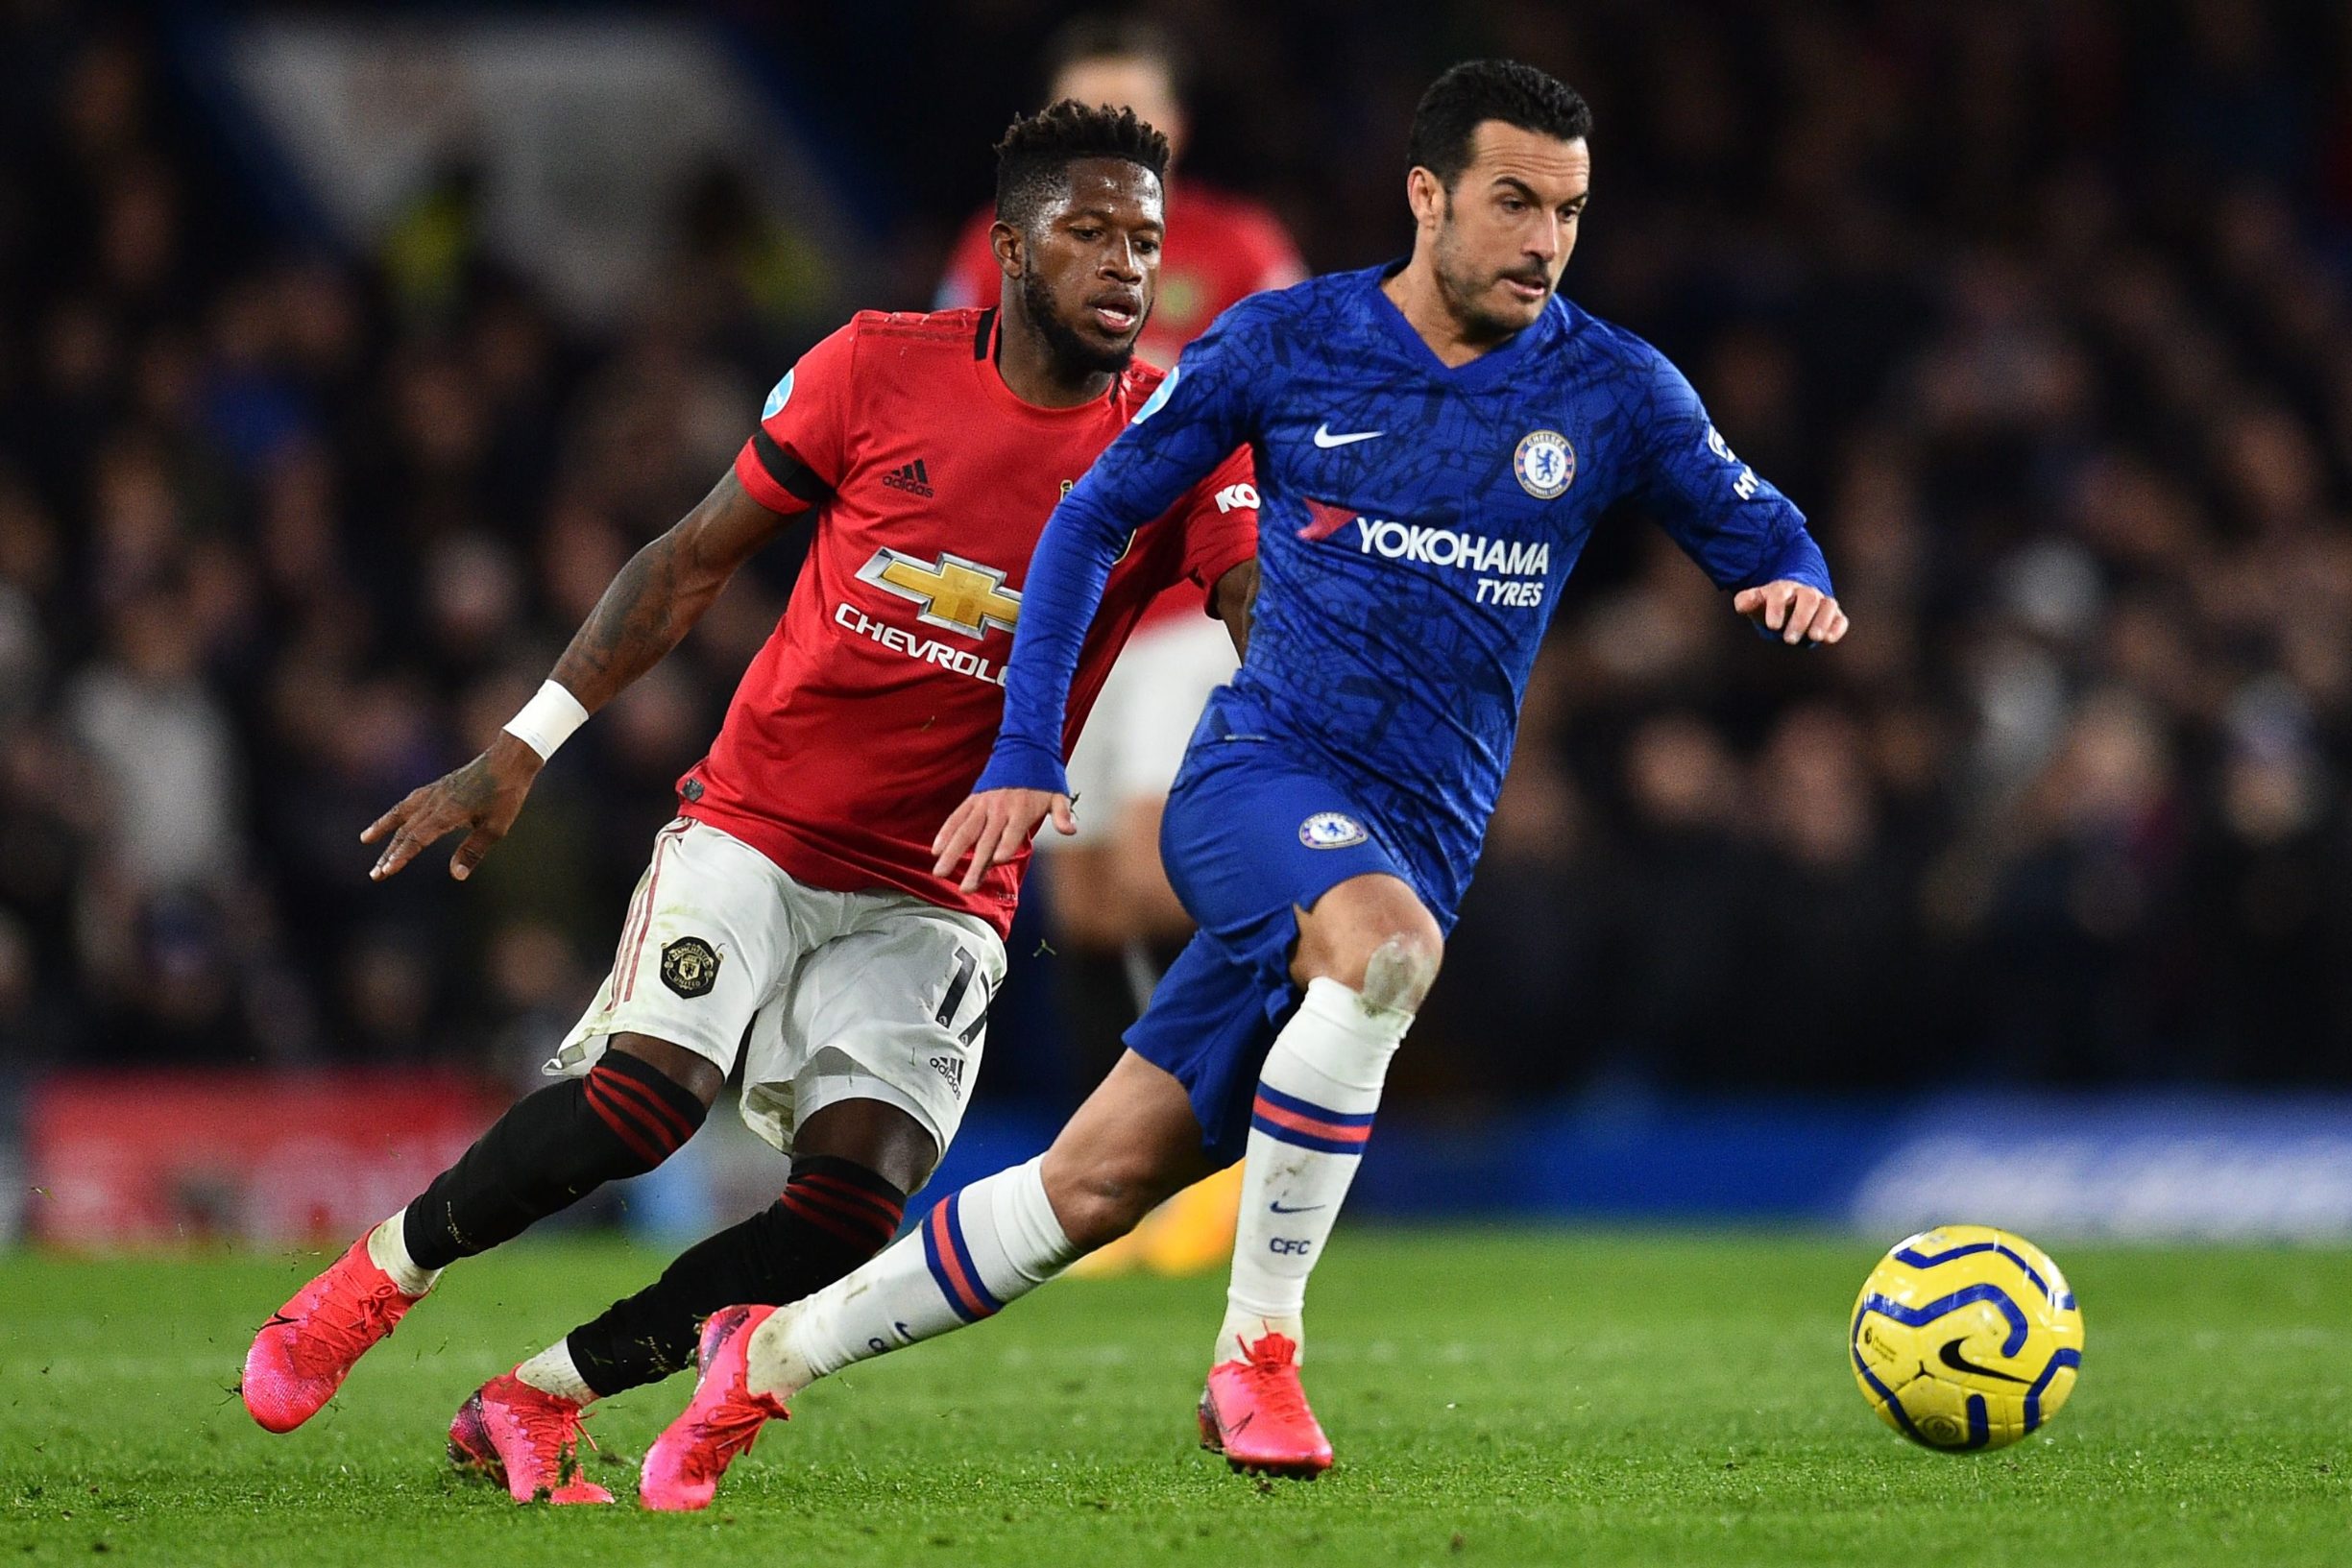 Chelsea's Spanish midfielder Pedro (R) runs away from Manchester United's Brazilian midfielder Fred during the English Premier League football match between Chelsea and Manchester United at Stamford Bridge in London on February 17, 2020. (Photo by Glyn KIRK / AFP) / RESTRICTED TO EDITORIAL USE. No use with unauthorized audio, video, data, fixture lists, club/league logos or 'live' services. Online in-match use limited to 120 images. An additional 40 images may be used in extra time. No video emulation. Social media in-match use limited to 120 images. An additional 40 images may be used in extra time. No use in betting publications, games or single club/league/player publications. / 